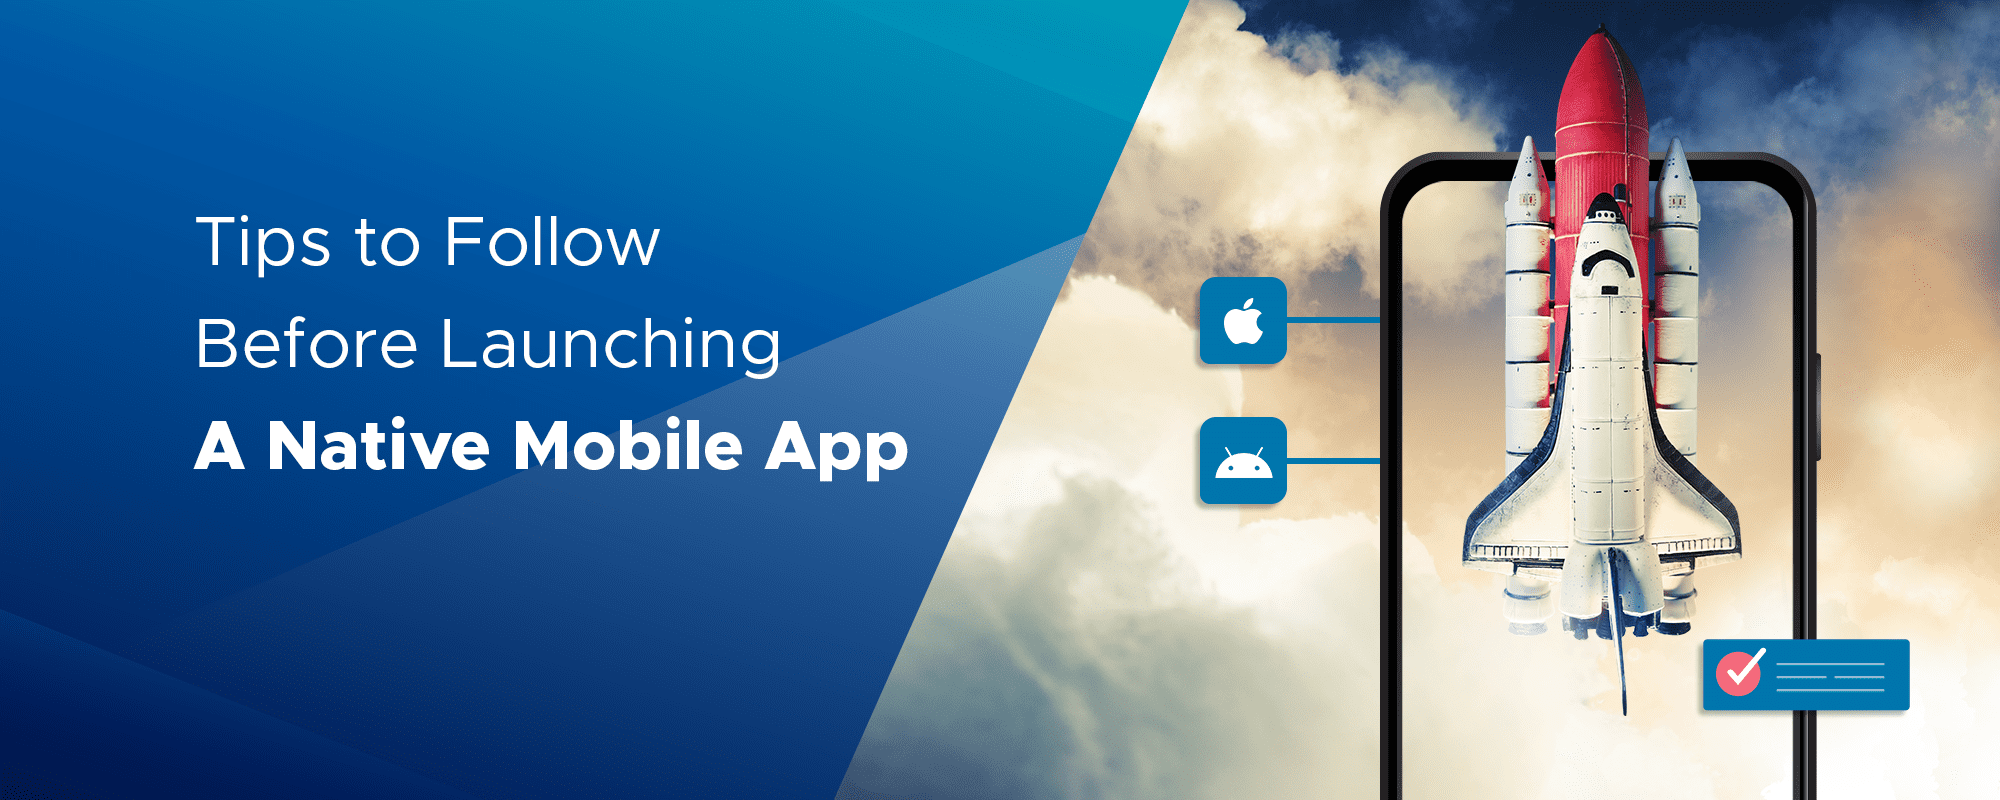 Tips to Follow Before Launching a Native Mobile App